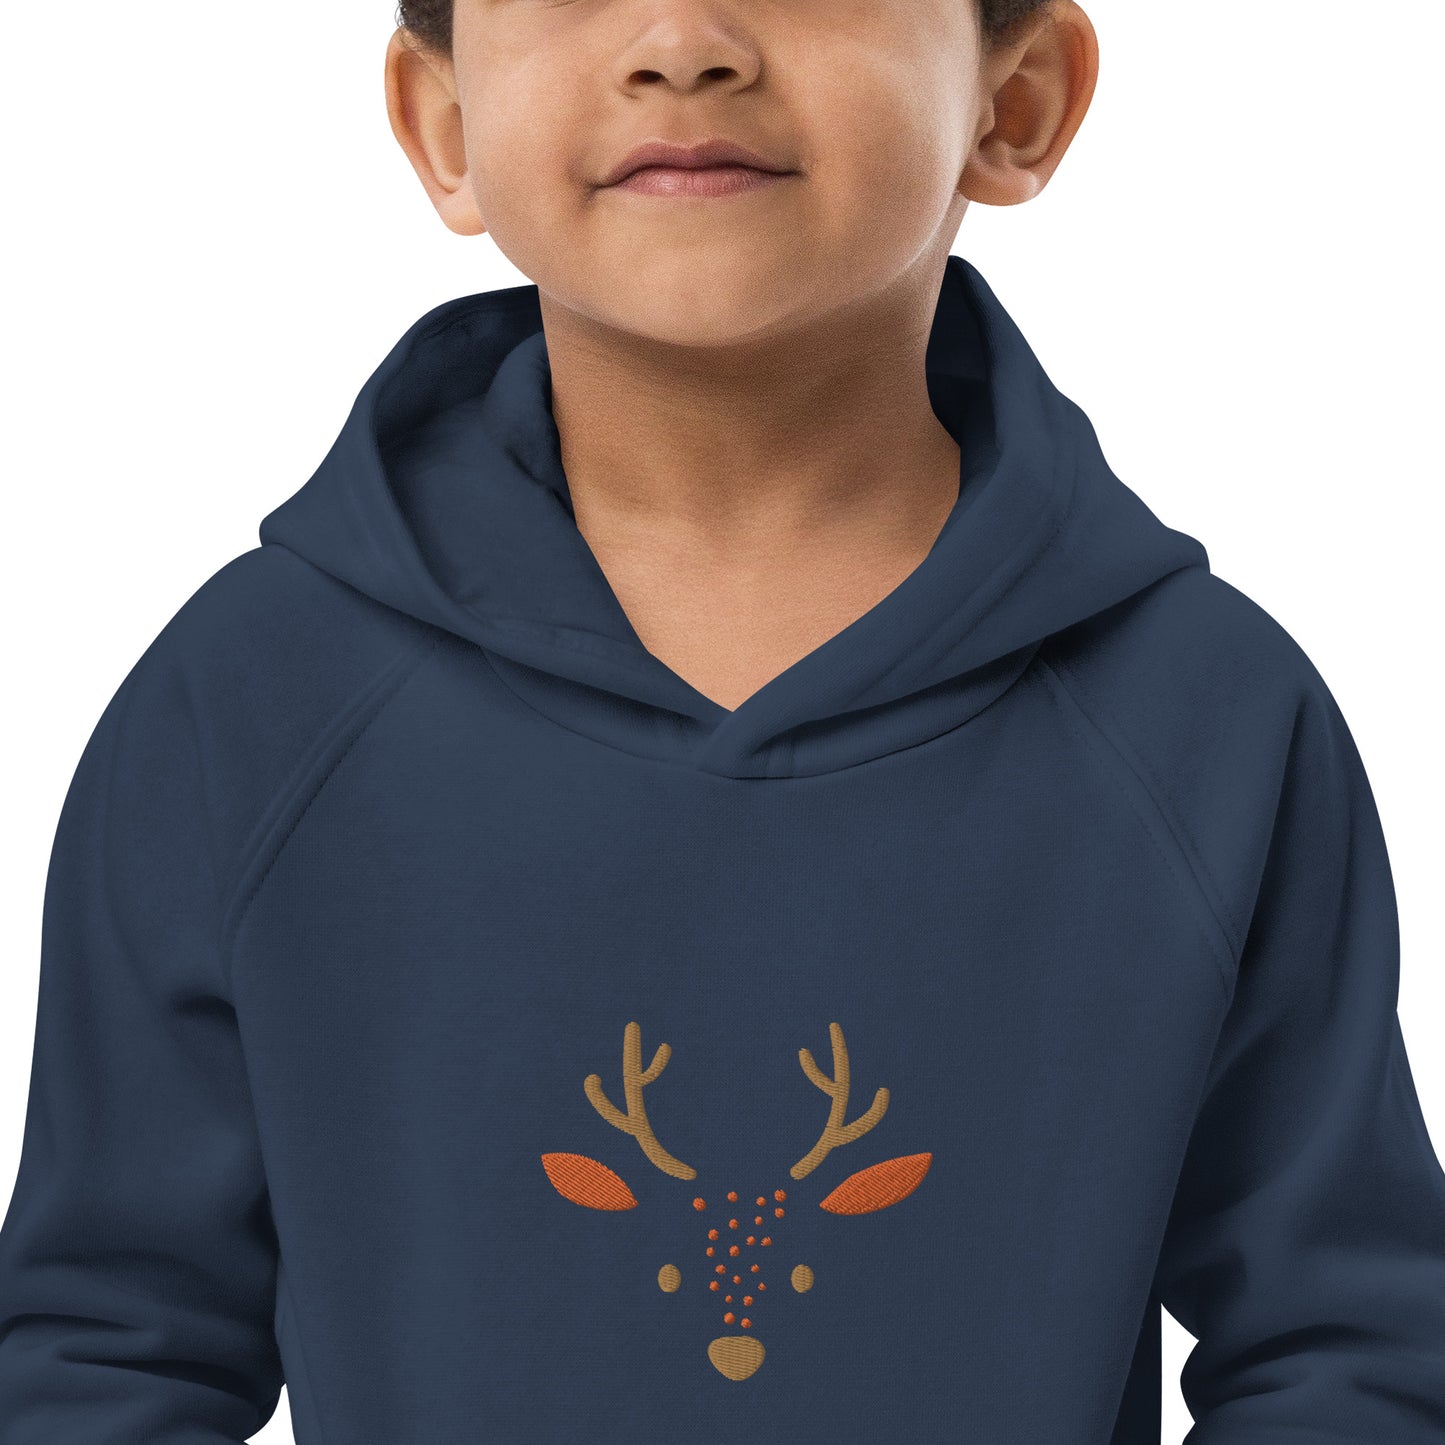 Deer 2 Kids Eco Hoodie with cute animals, Organic Cotton pullover for children, gift idea for kids, soft hoodie for kids for Christmas